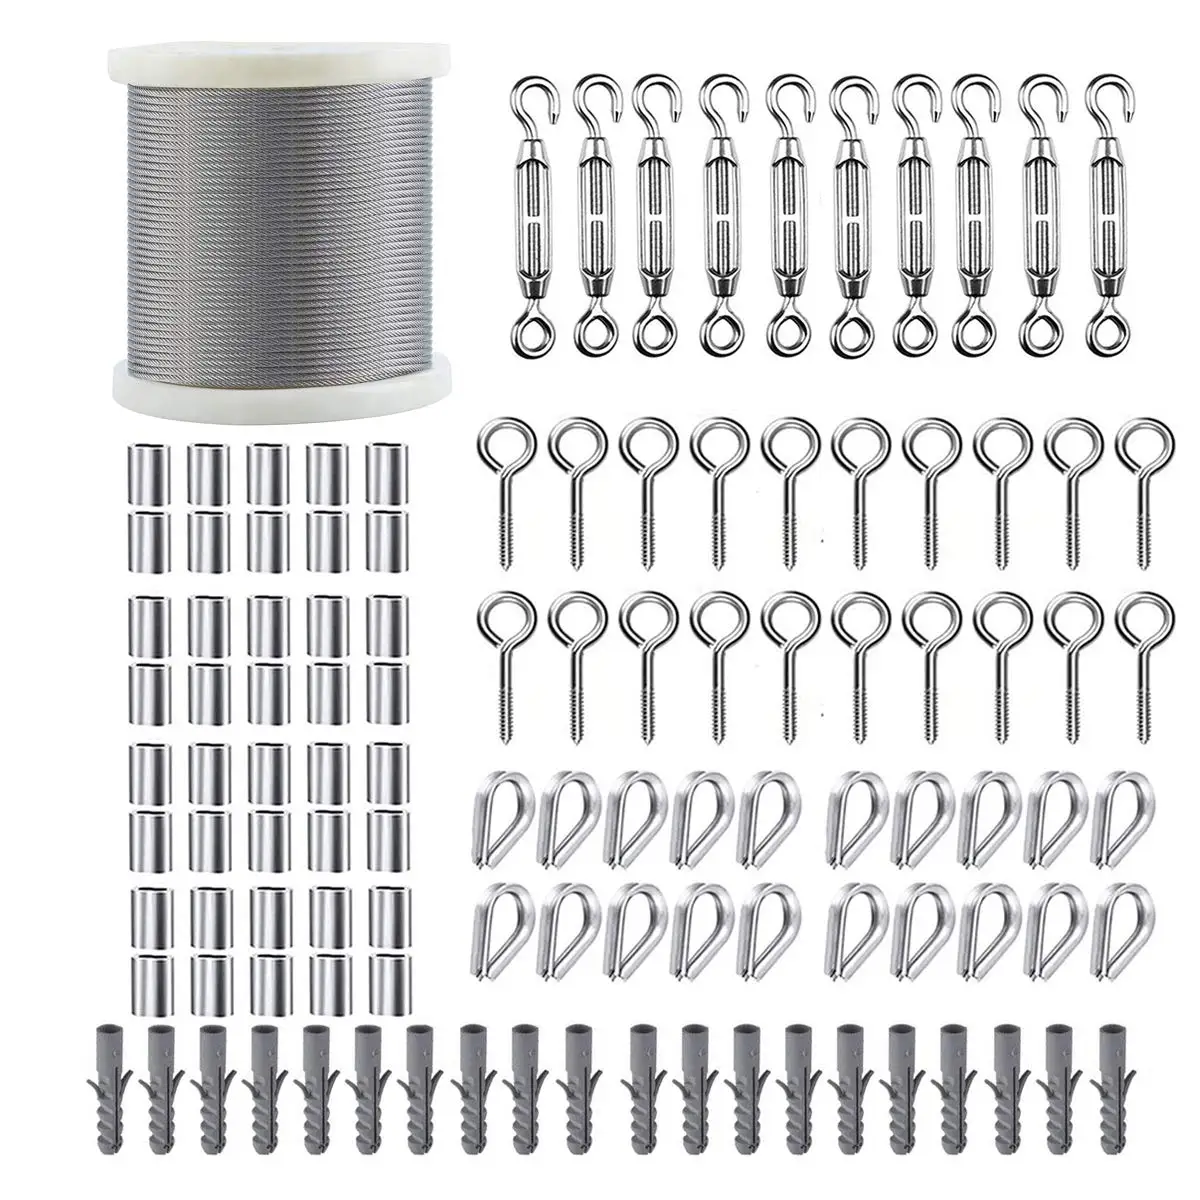 Turnbuckle Wire Tensioner 1/16 Wire Rope Kit,200ft Stainless Steel Coated Cable Wire Rope,M5 Turnbuckles Cable Railing Kit